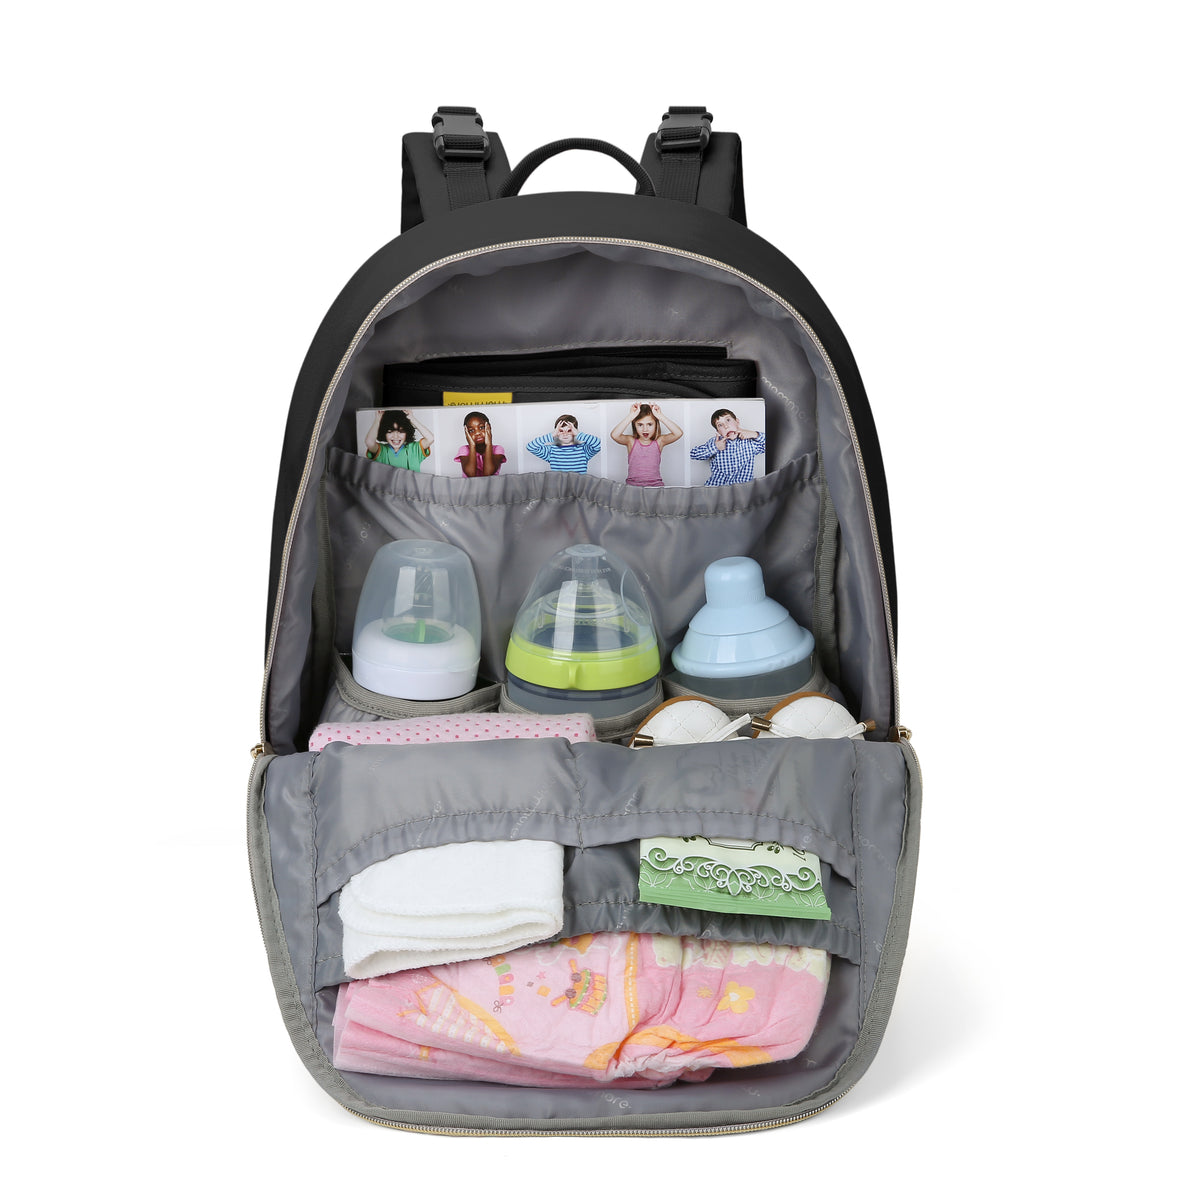 Mommore | The Durable, functional & Fashionable Diaper Bags For Moms